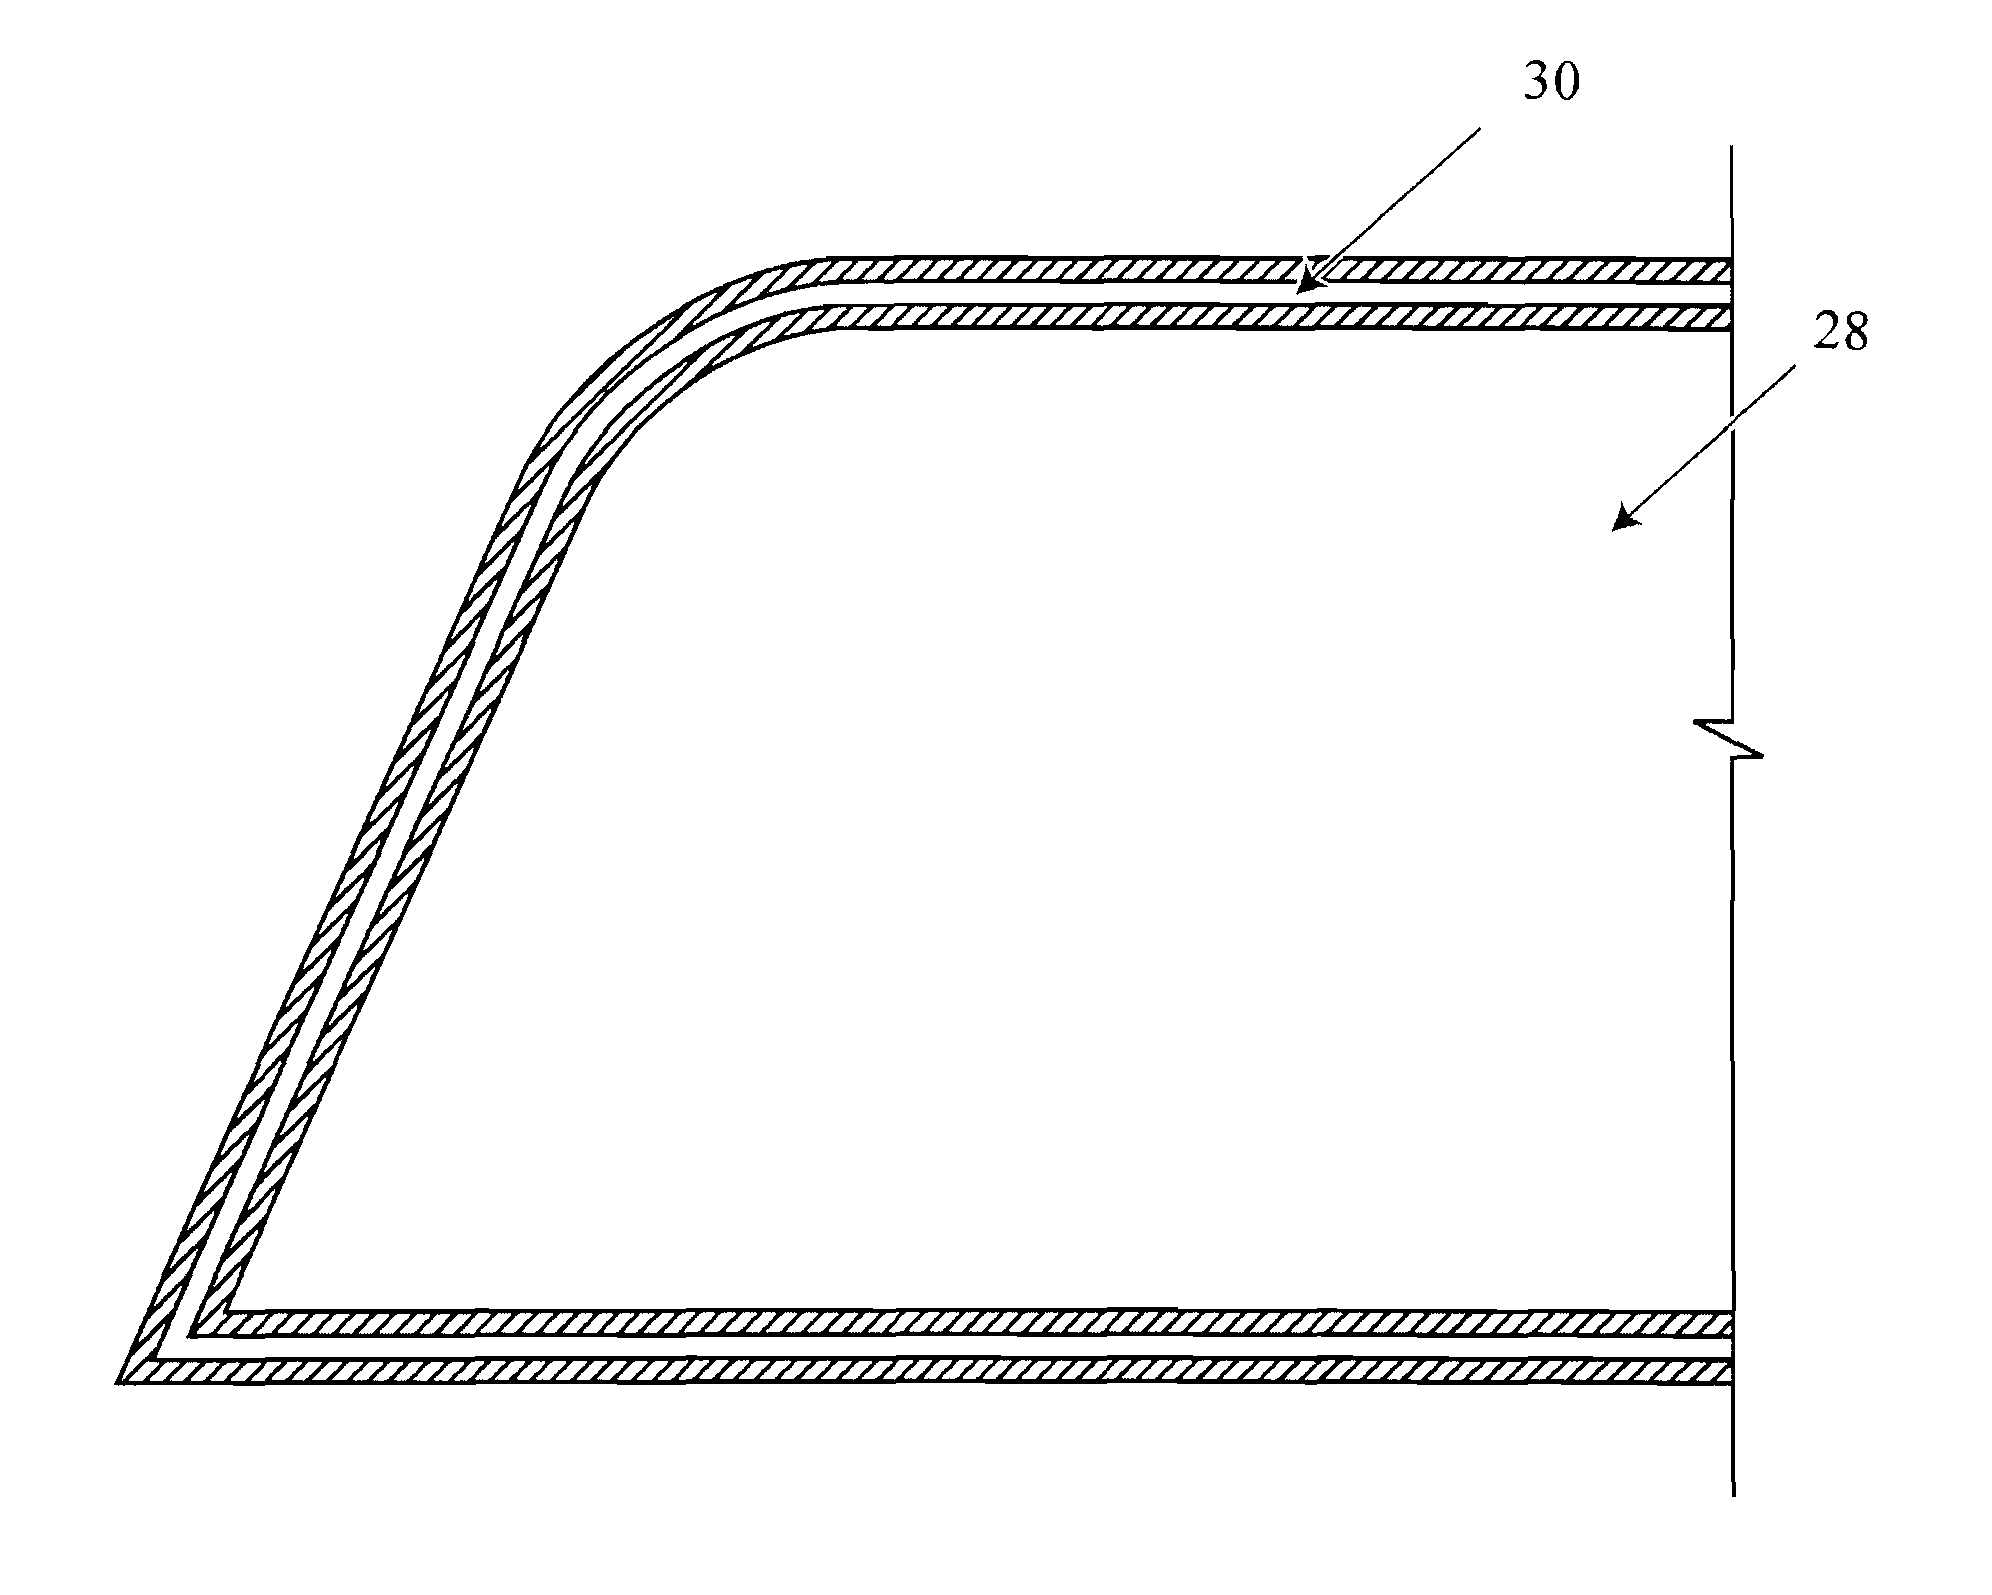 Wear Resistant Vapor Deposited Coating, Method of Coating Deposition and Applications Therefor